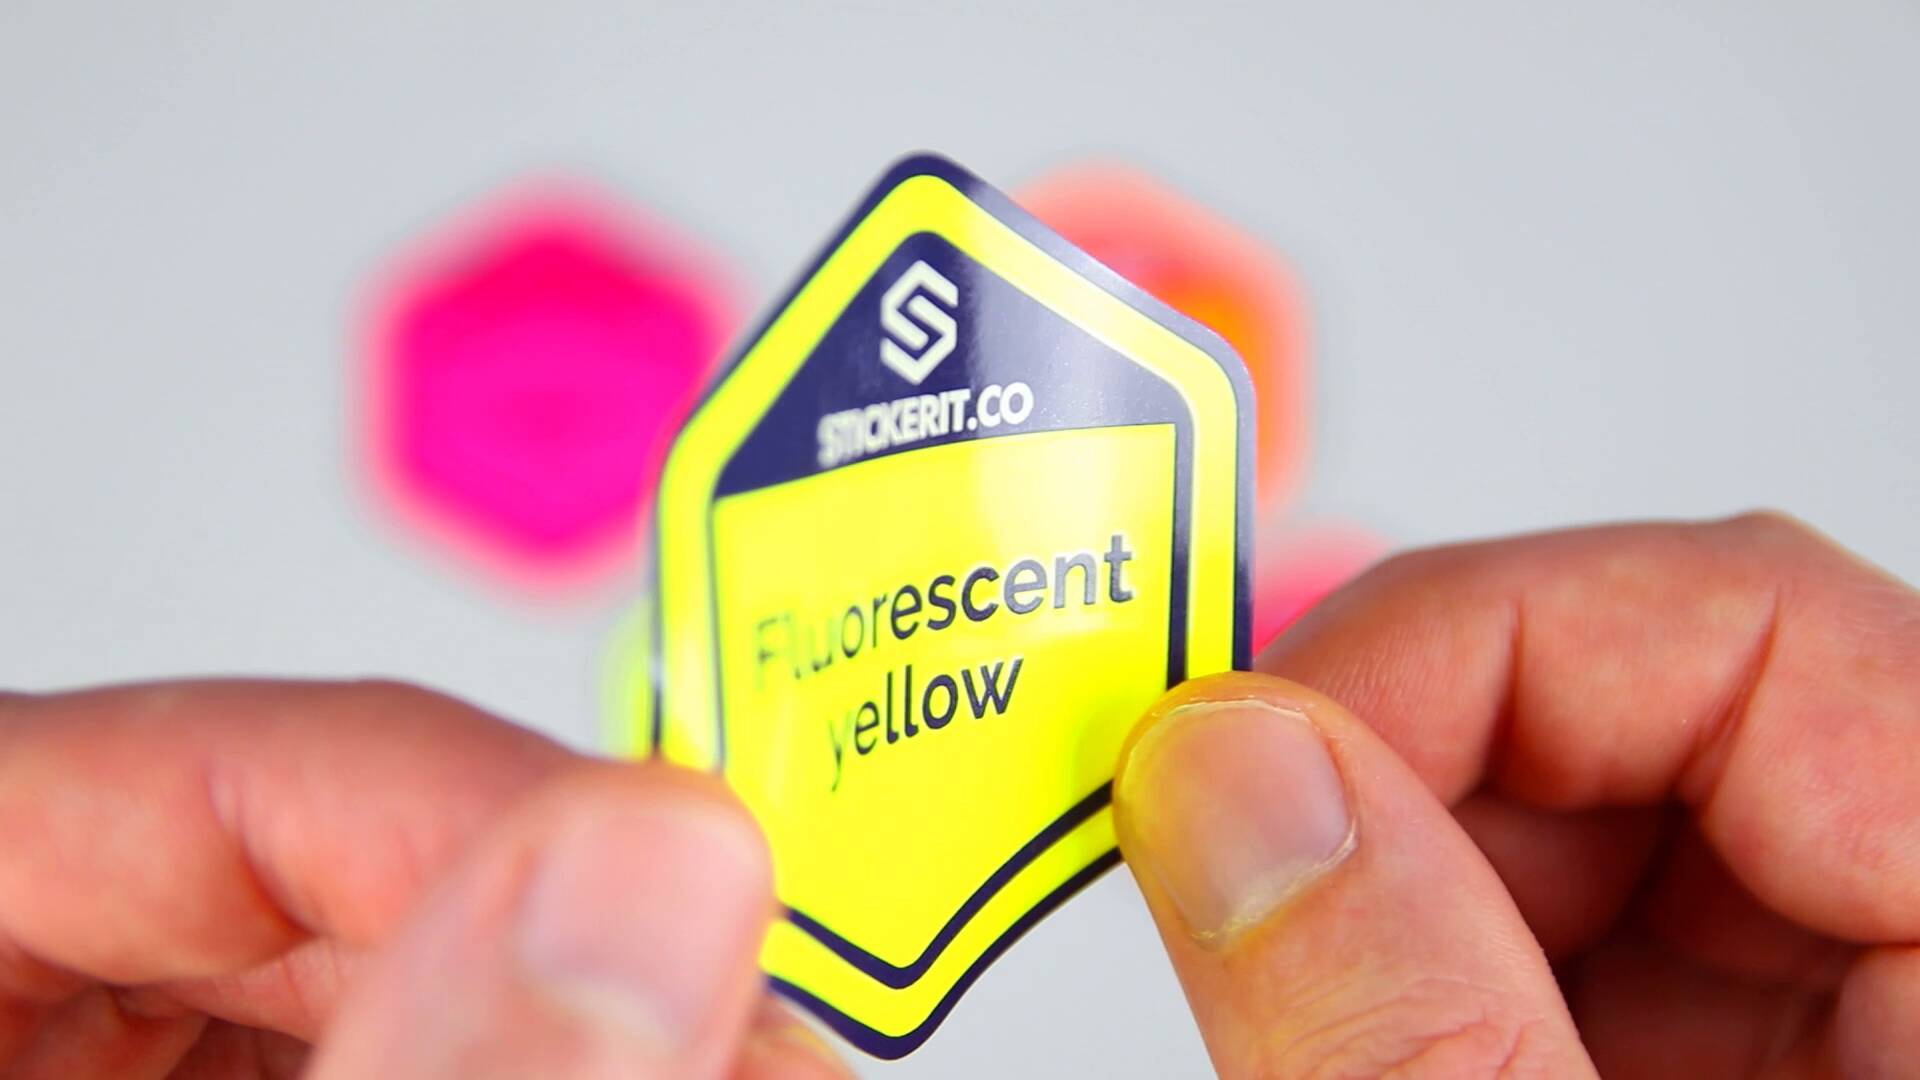 A short video showing what fluorescent stickers are